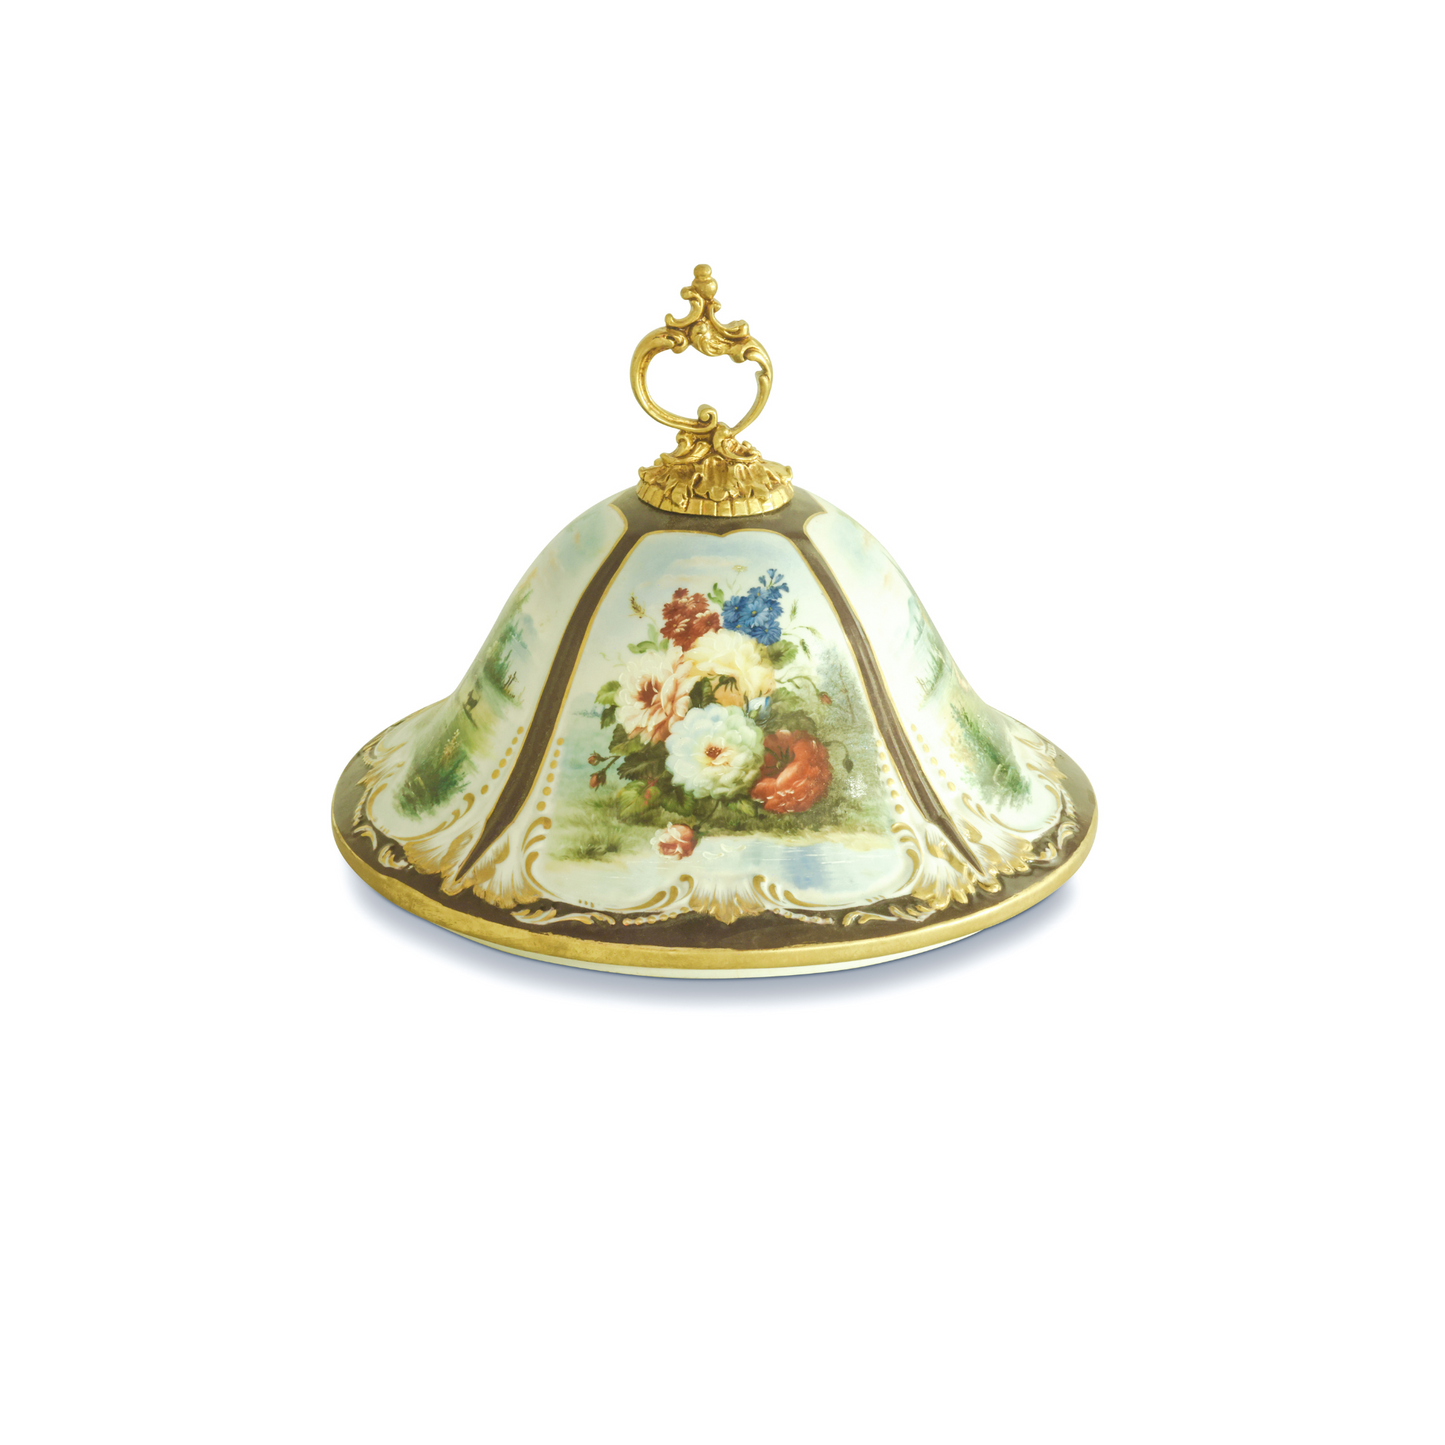 Gold Urn with Hand-painted Rococo Motifs